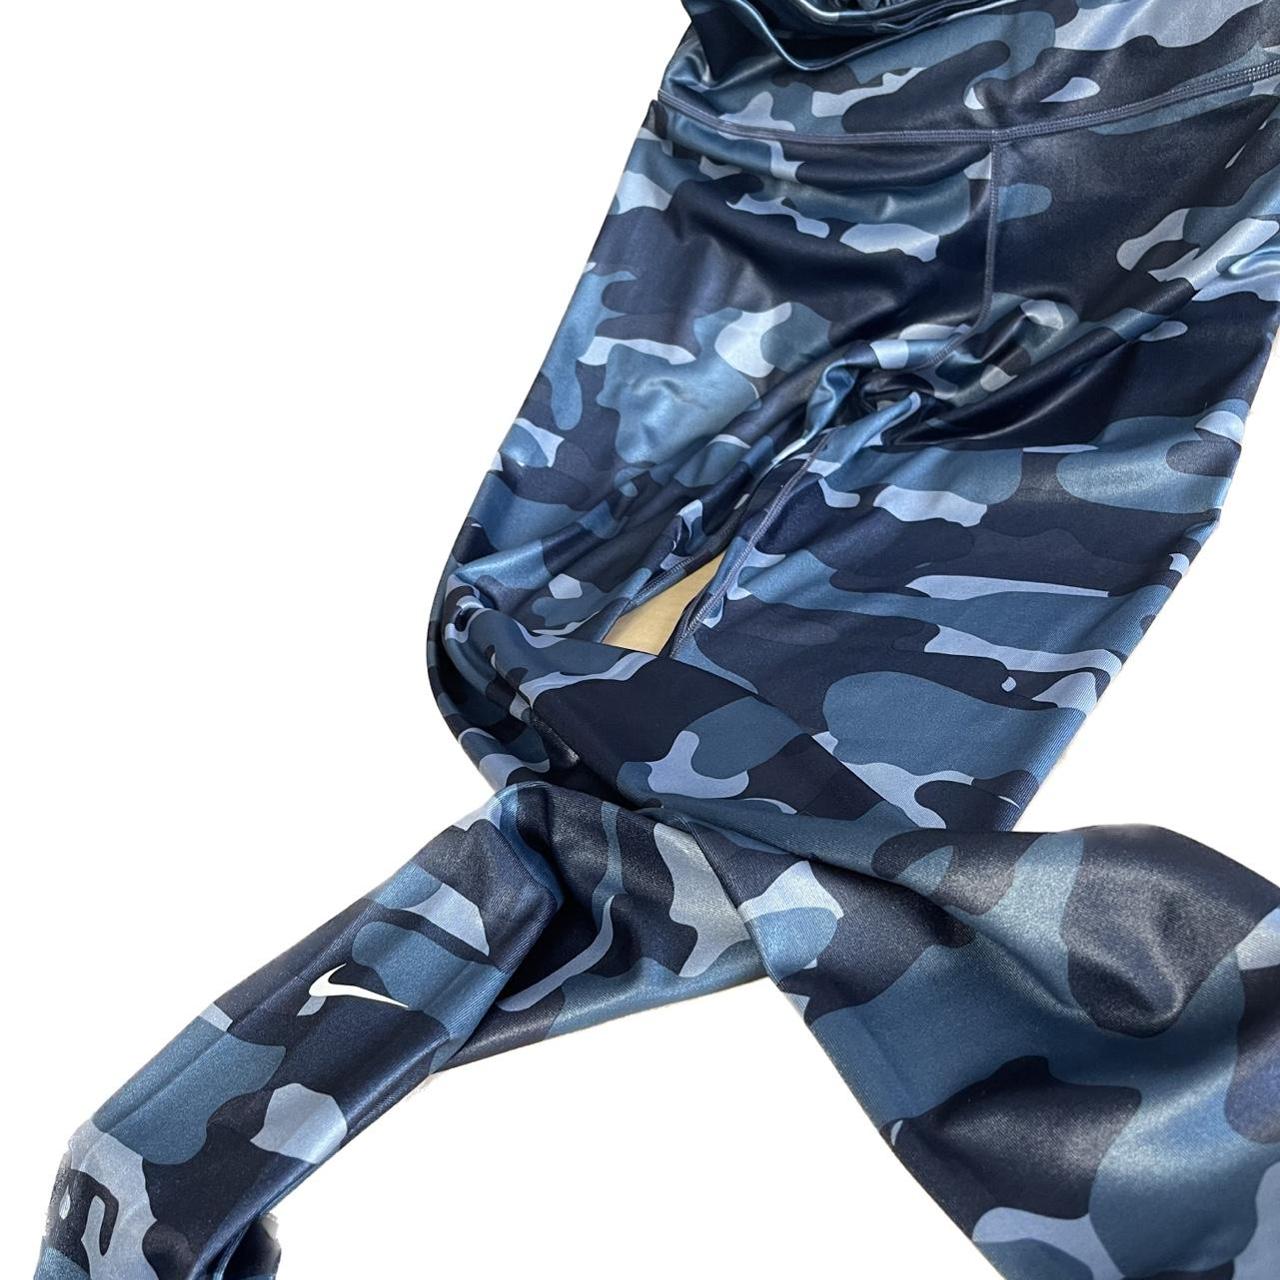 Nike One Blue Camo Tight Fit Midrise full Length - Depop